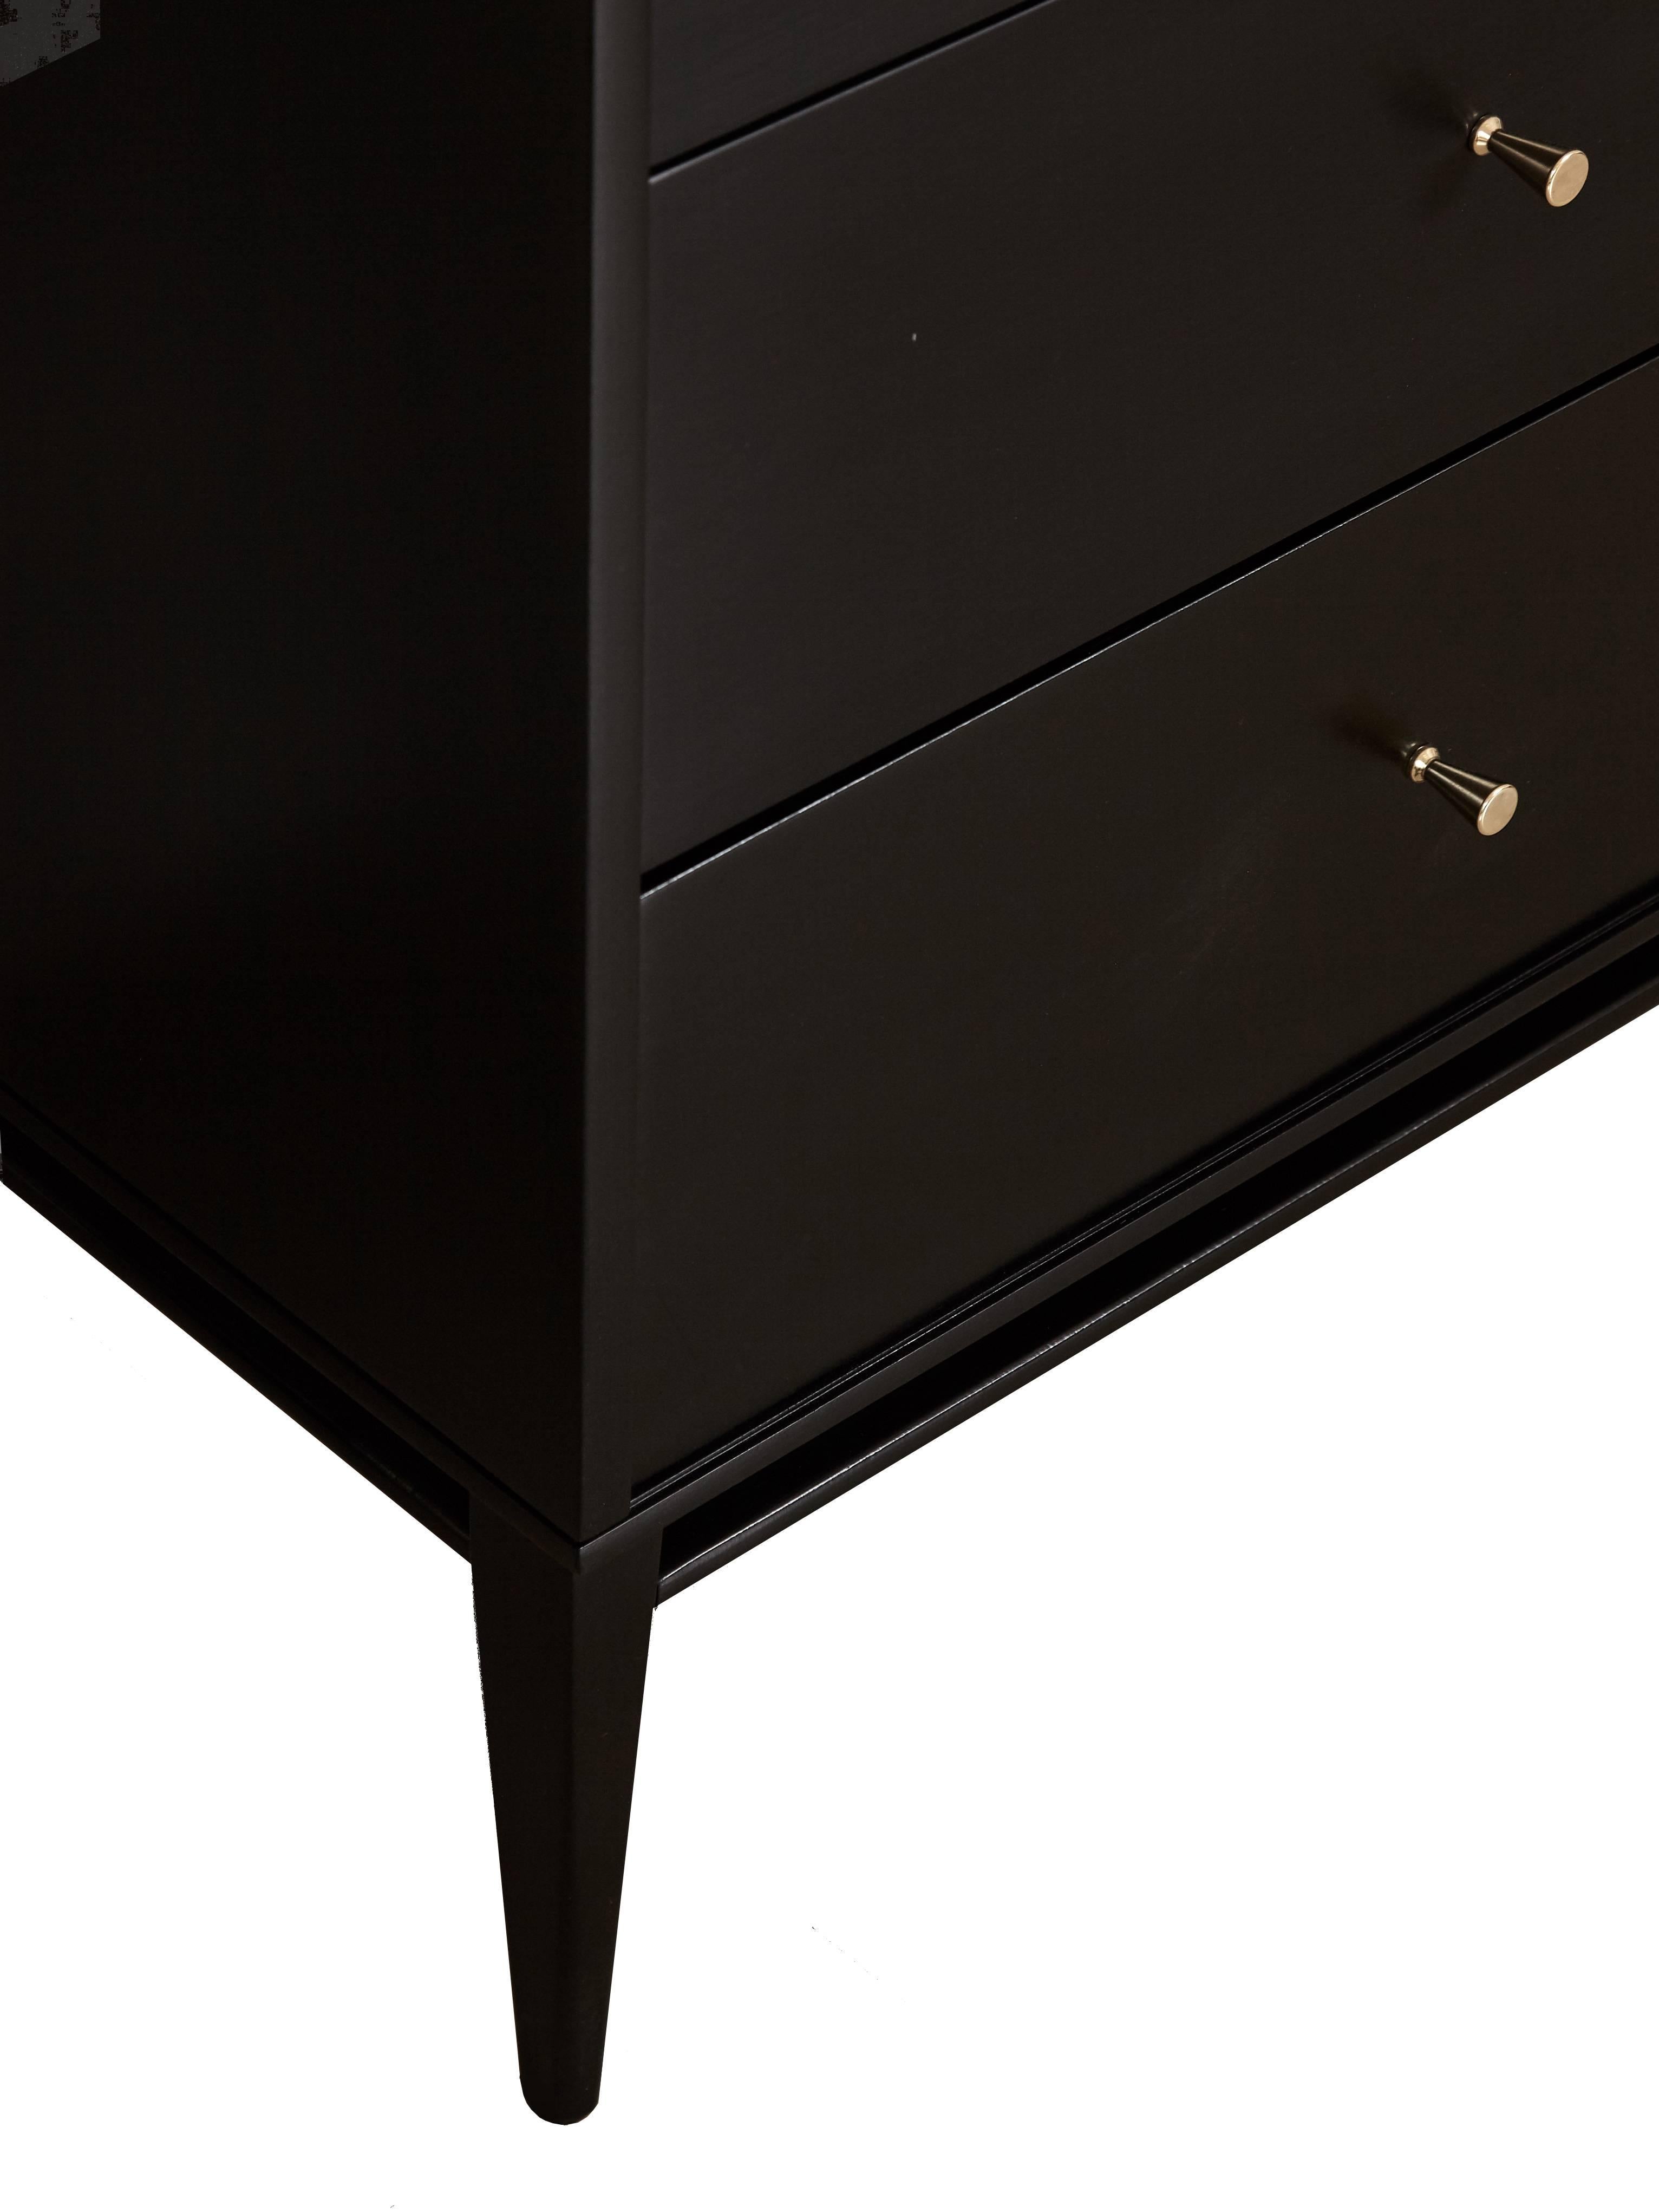 Paul McCobb Planner Group console featuring three drawers and two sliding doors with adjustable shelving interior. Fully restored in black lacquer piano finish.